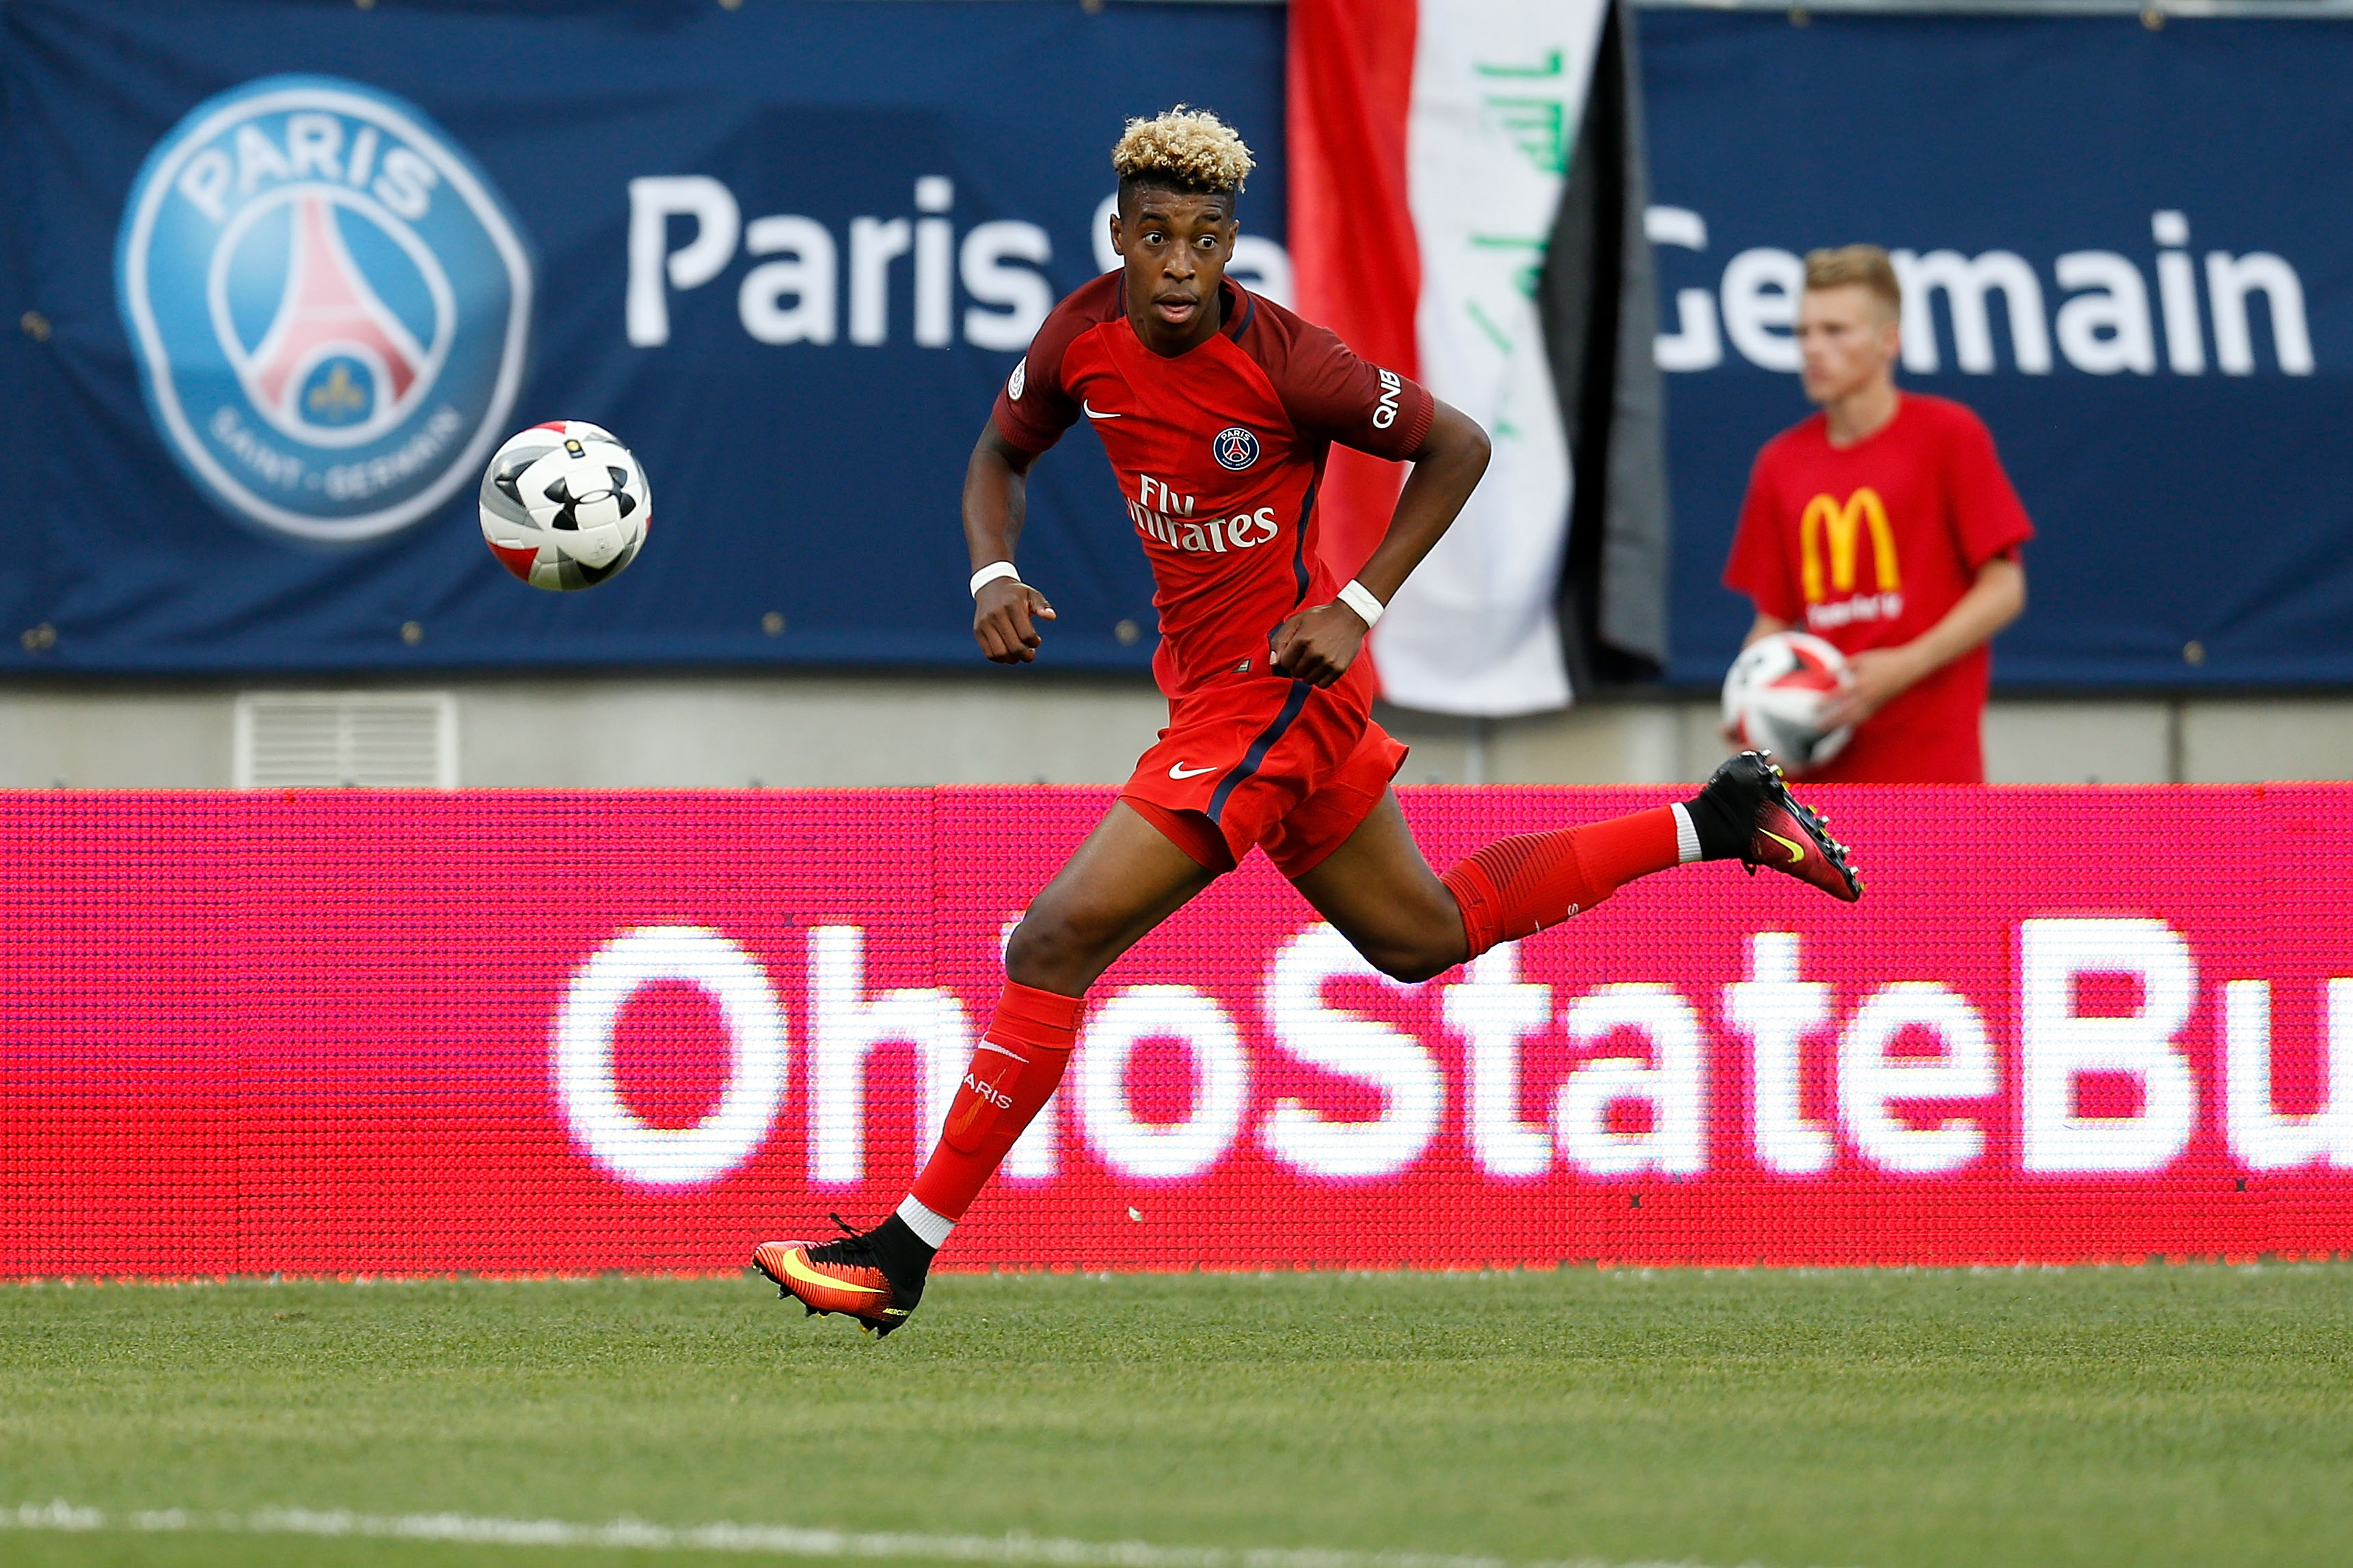 COLUMBUS, OH - JULY 27:  Presnel Kimpembe #3 of Paris Saint-Germain F.C dribbles the ball upfield during the first half of the game against Real Madrid C.F. on July 27, 2016 at Ohio Stadium in Columbus, Ohio. (Photo by Kirk Irwin/Getty Images)